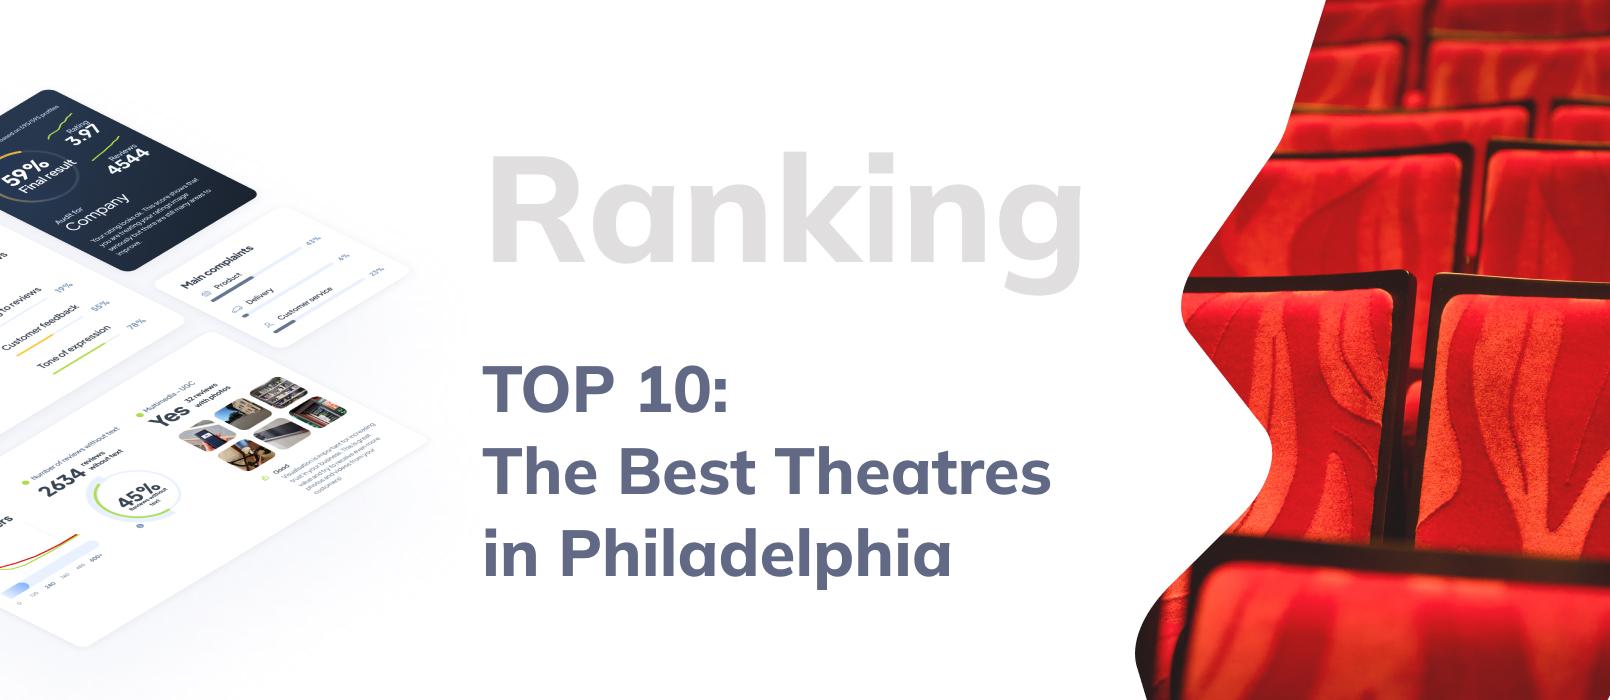 What are the Best Theatres in Philadelphia? TOP 10 Ranking Based on Customers Reviews